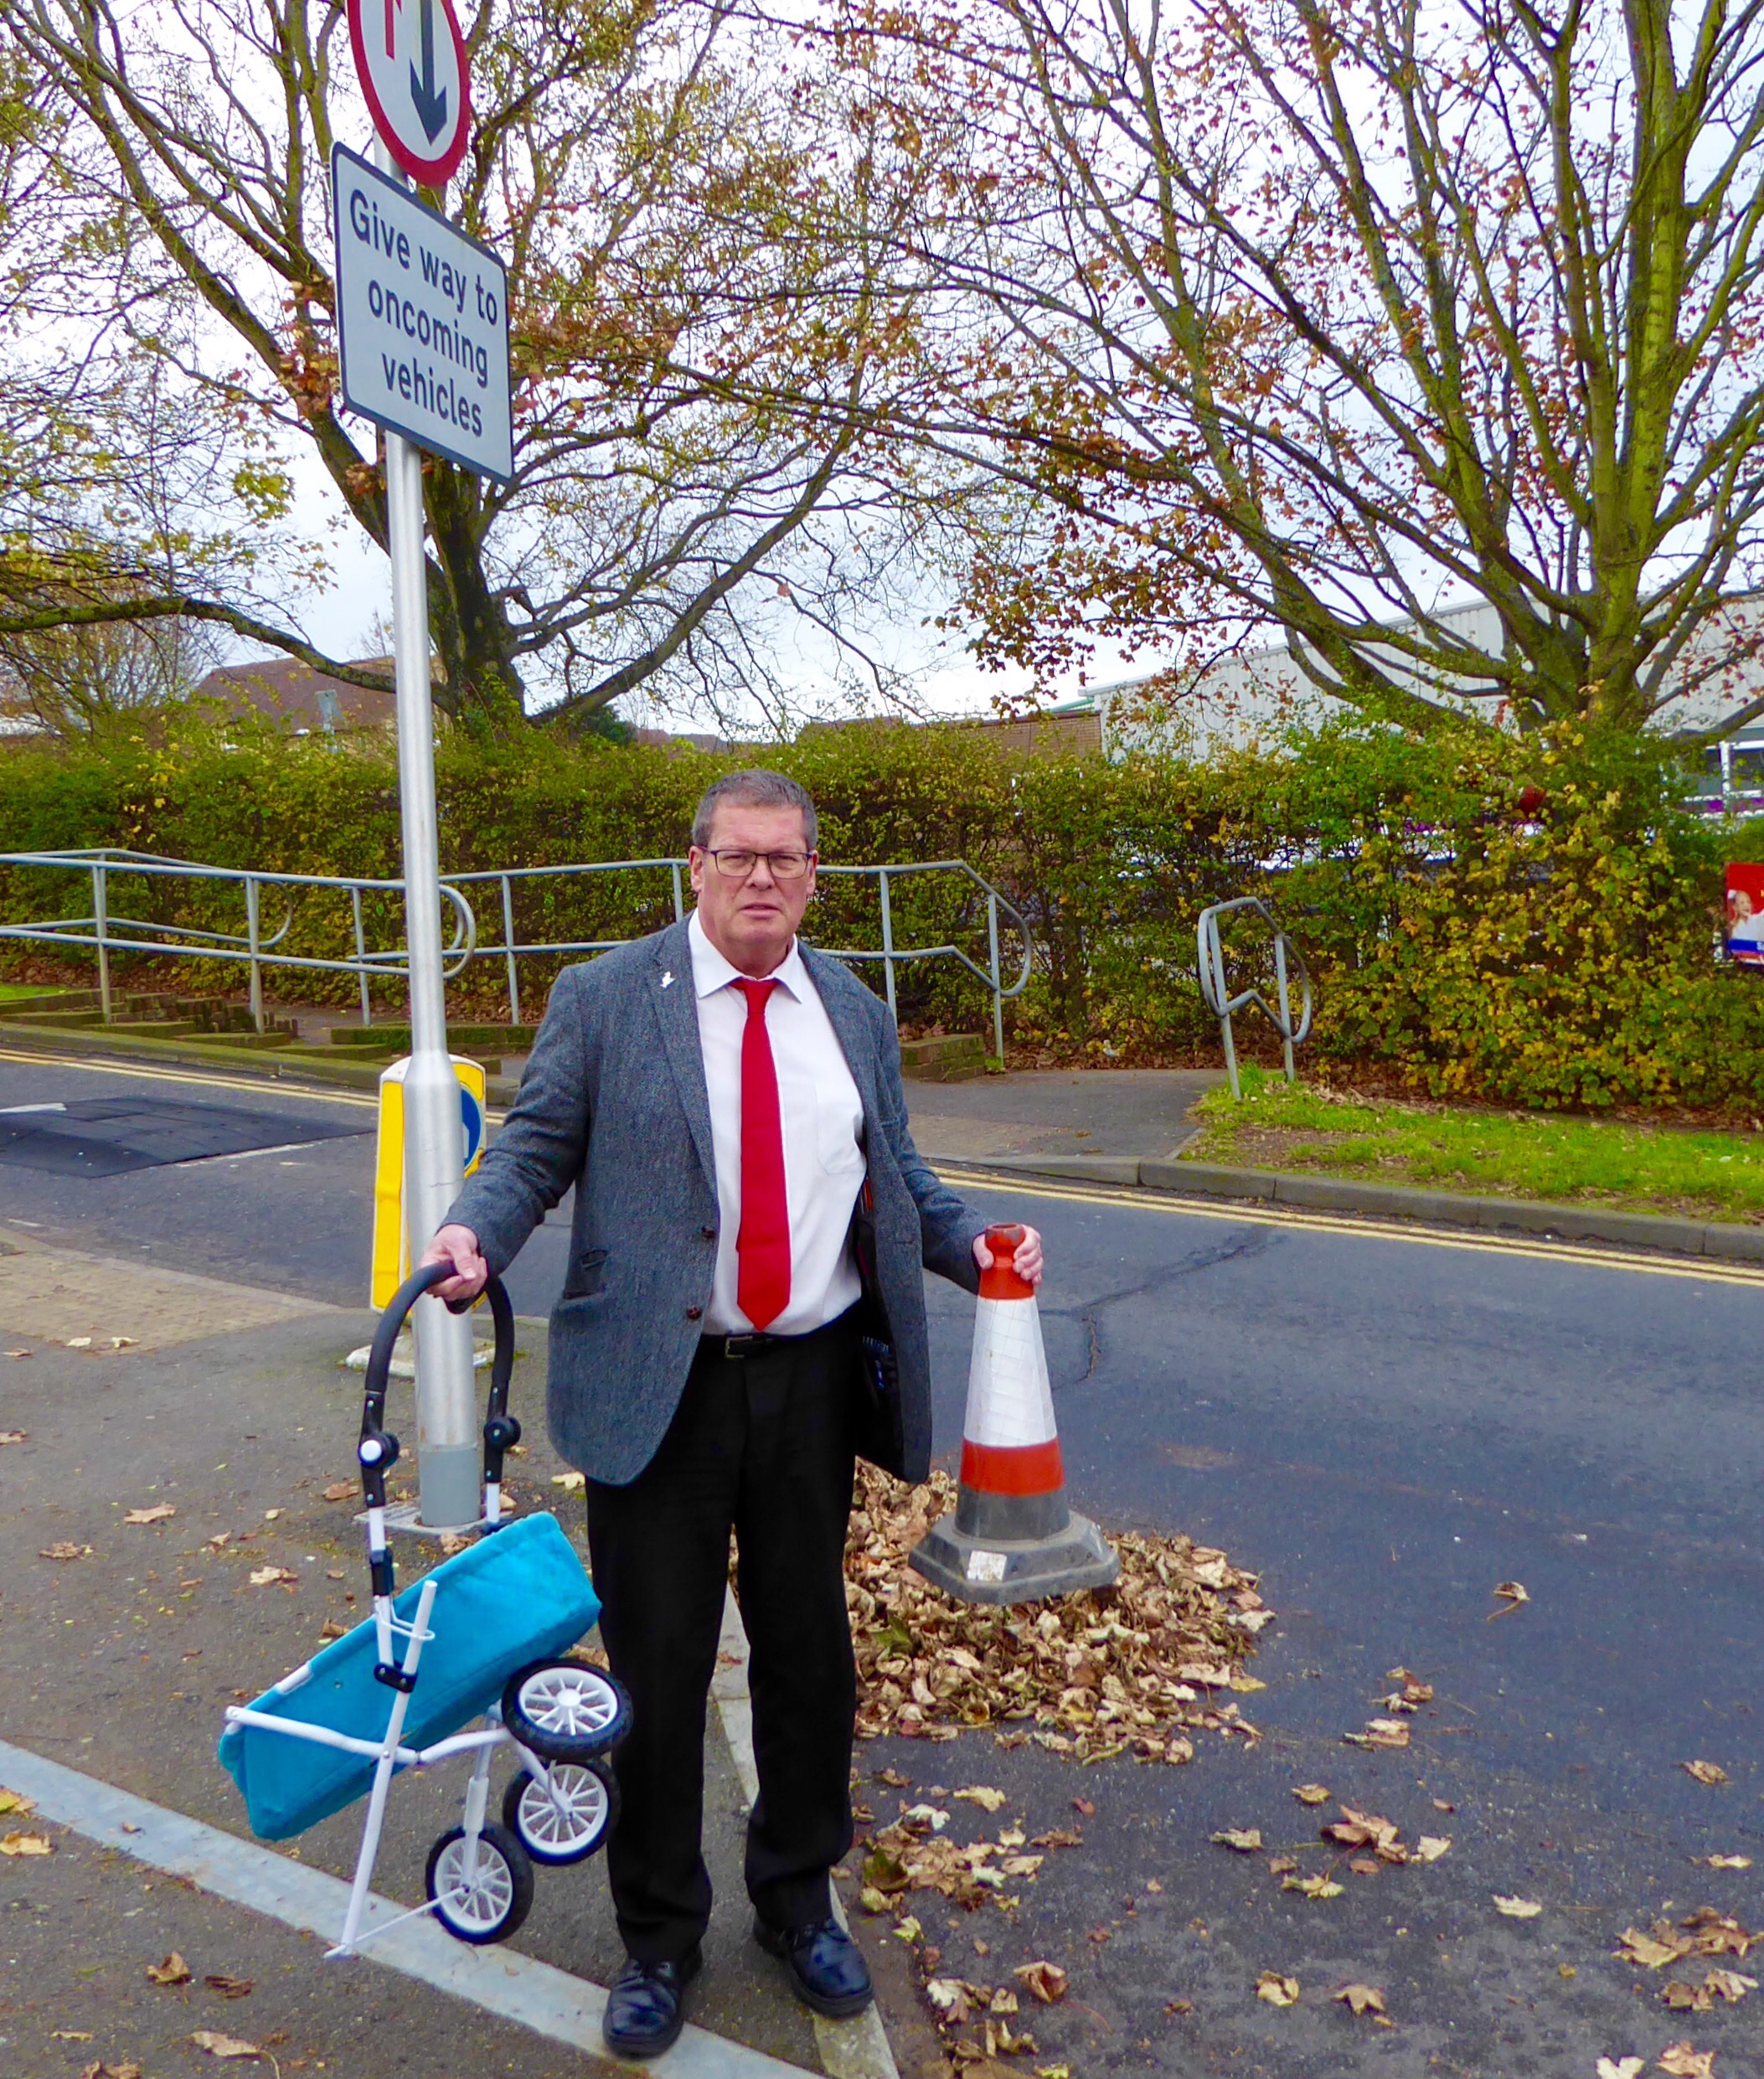 Councillor Peter Atkinson with items thrown in front of cars in North Portslade